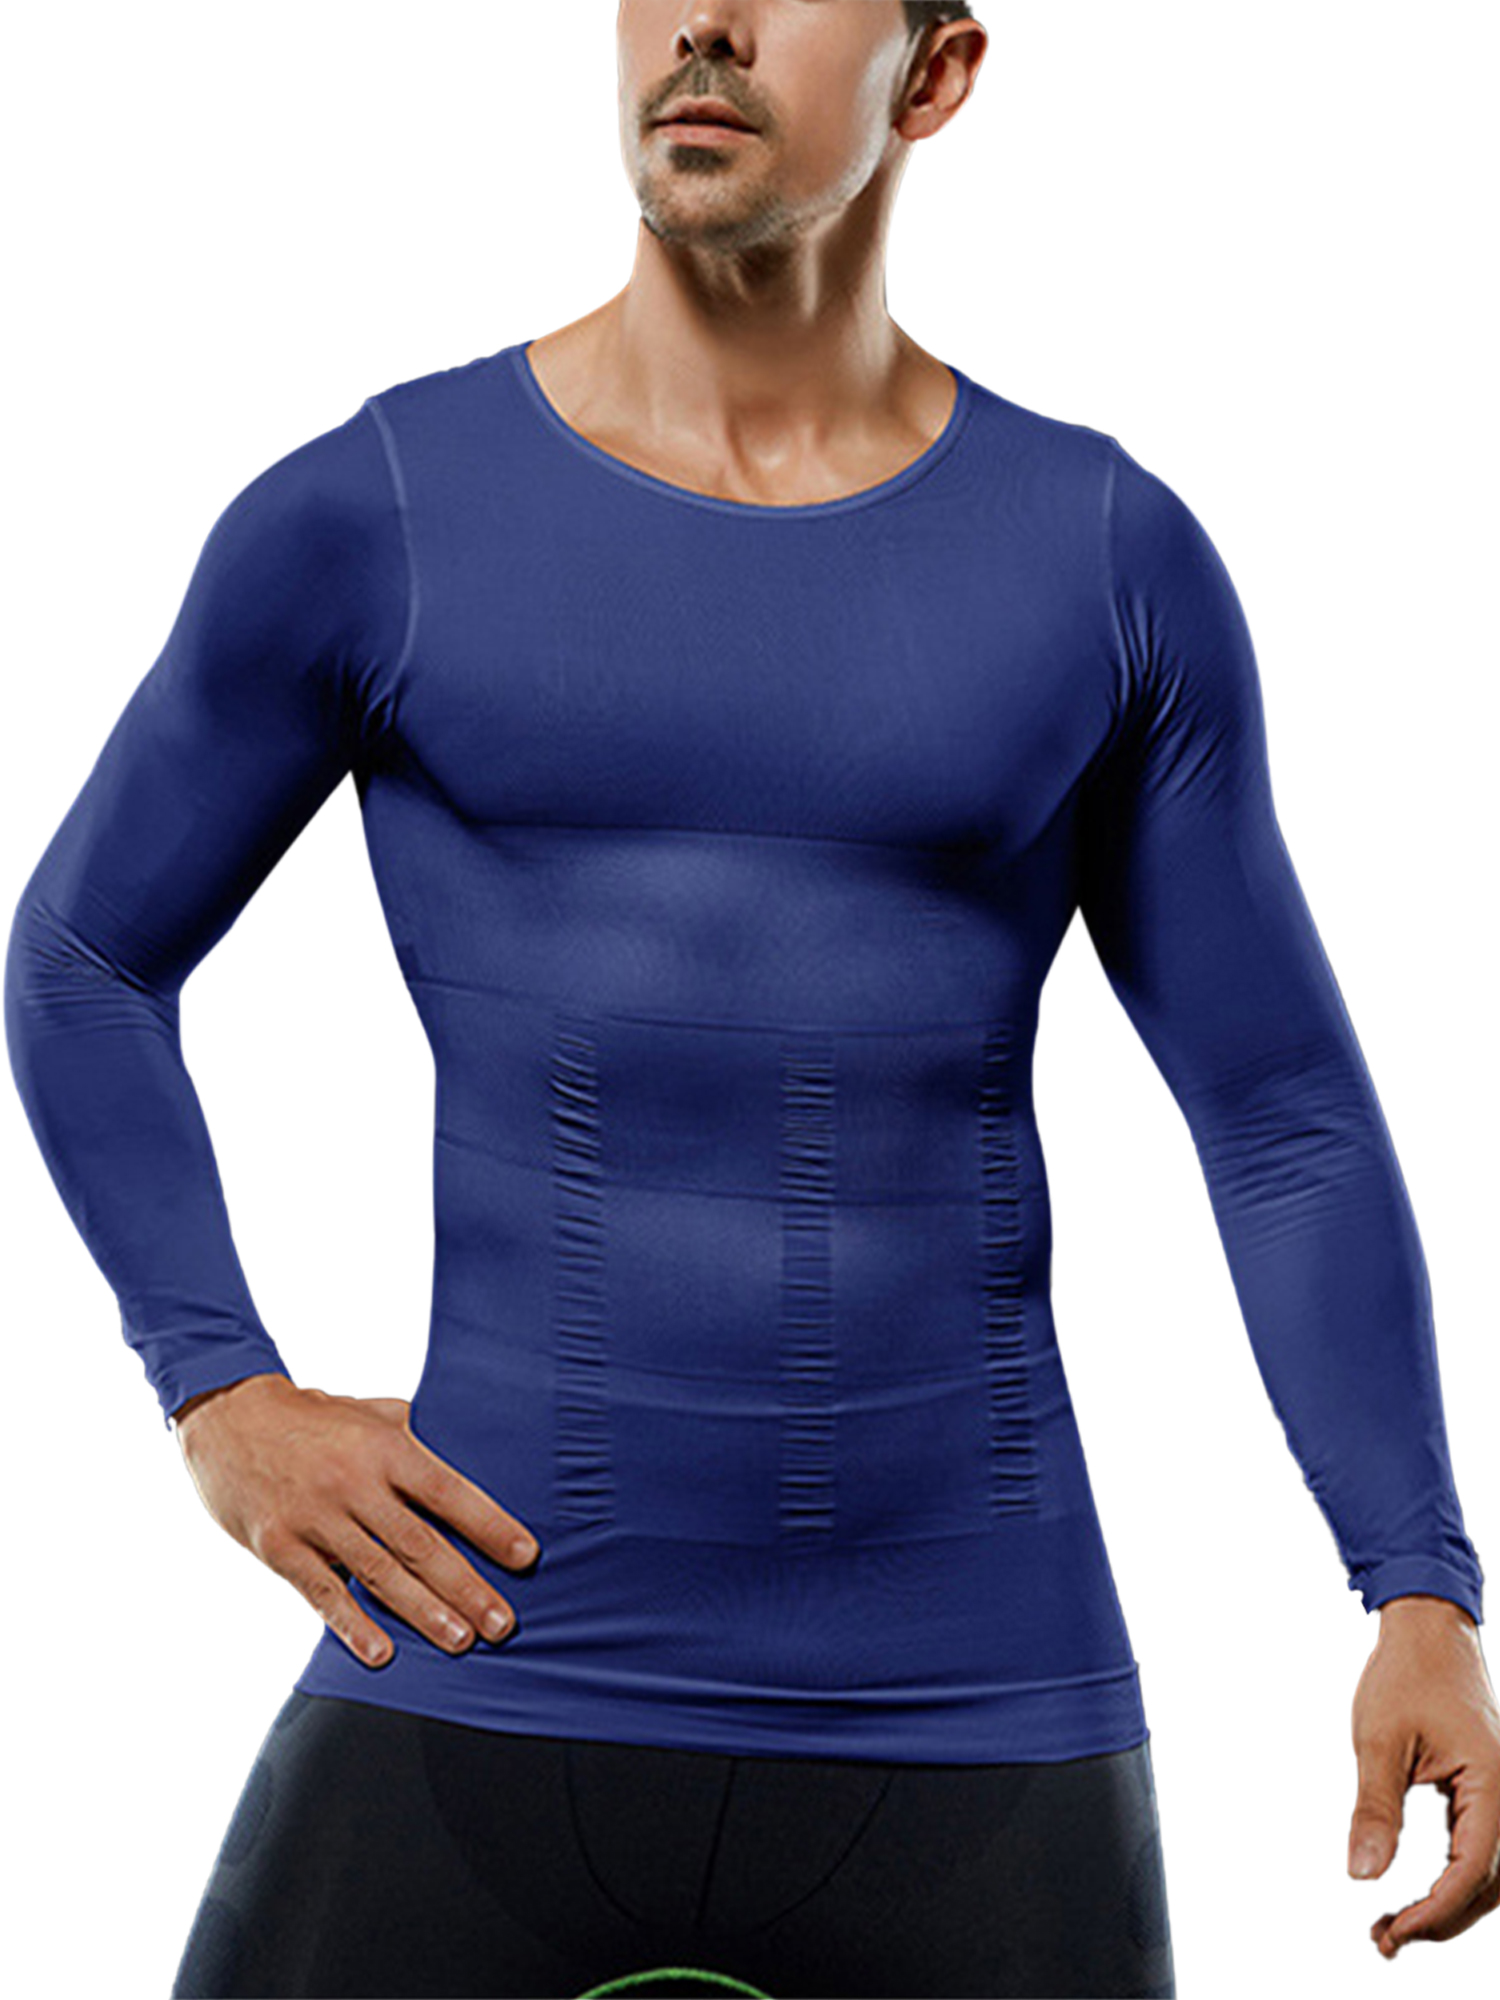 Official Pure Blue Product Men/'s Sports Base Layer Long Sleeved Compression Vest Comfortable Tight Fit Body Shaper That Compresses Core Muscle Areas Aids Performance